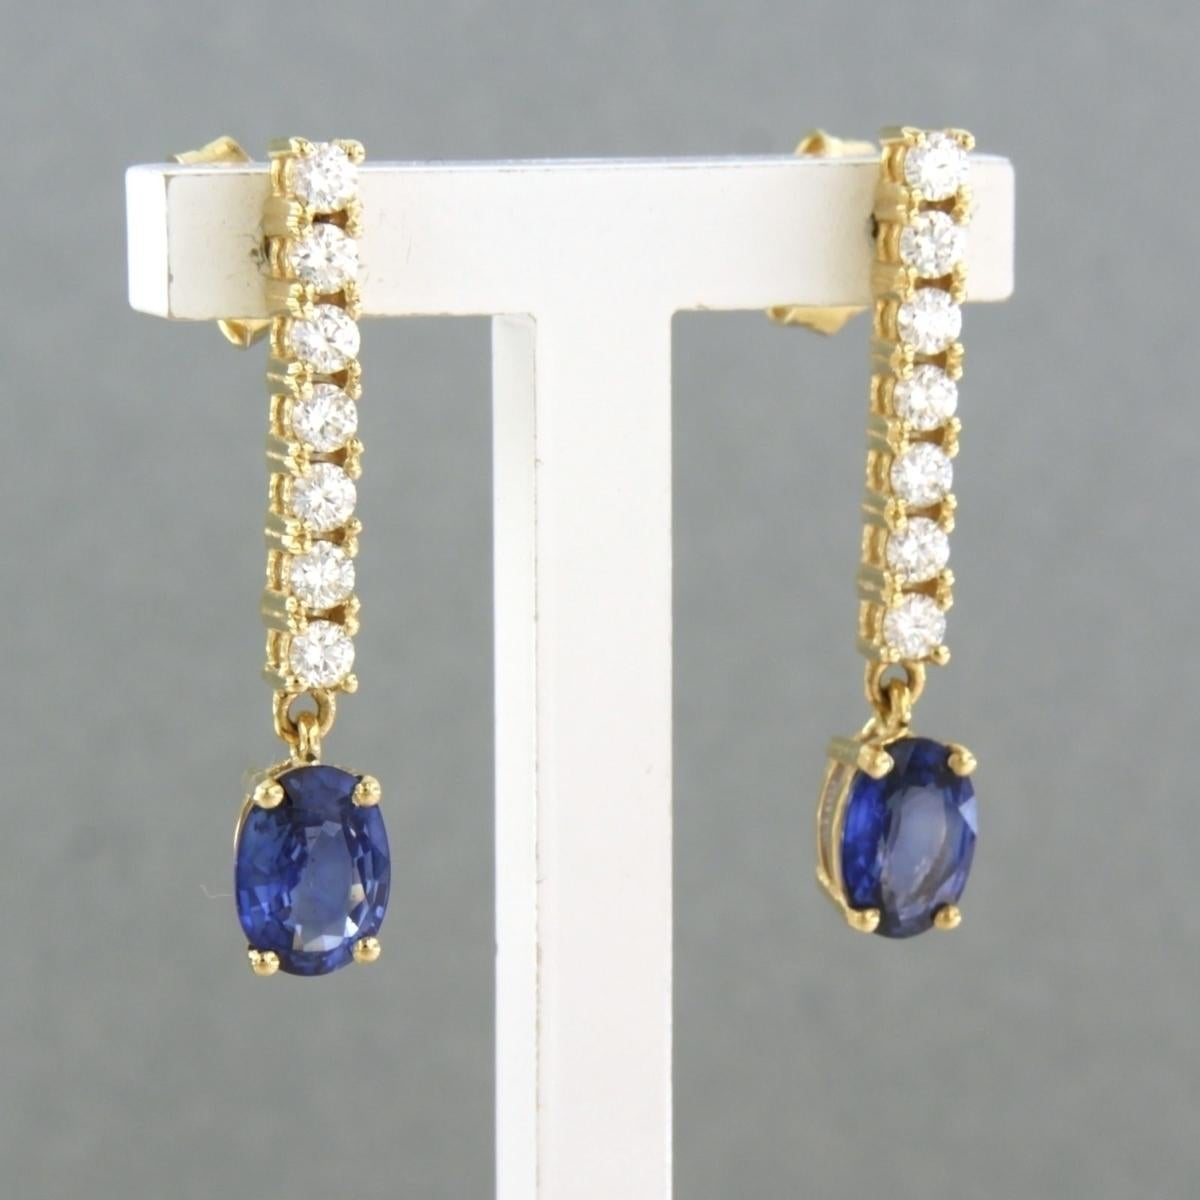 Modern Earrings set with sapphire and diamonds 18k yellow gold